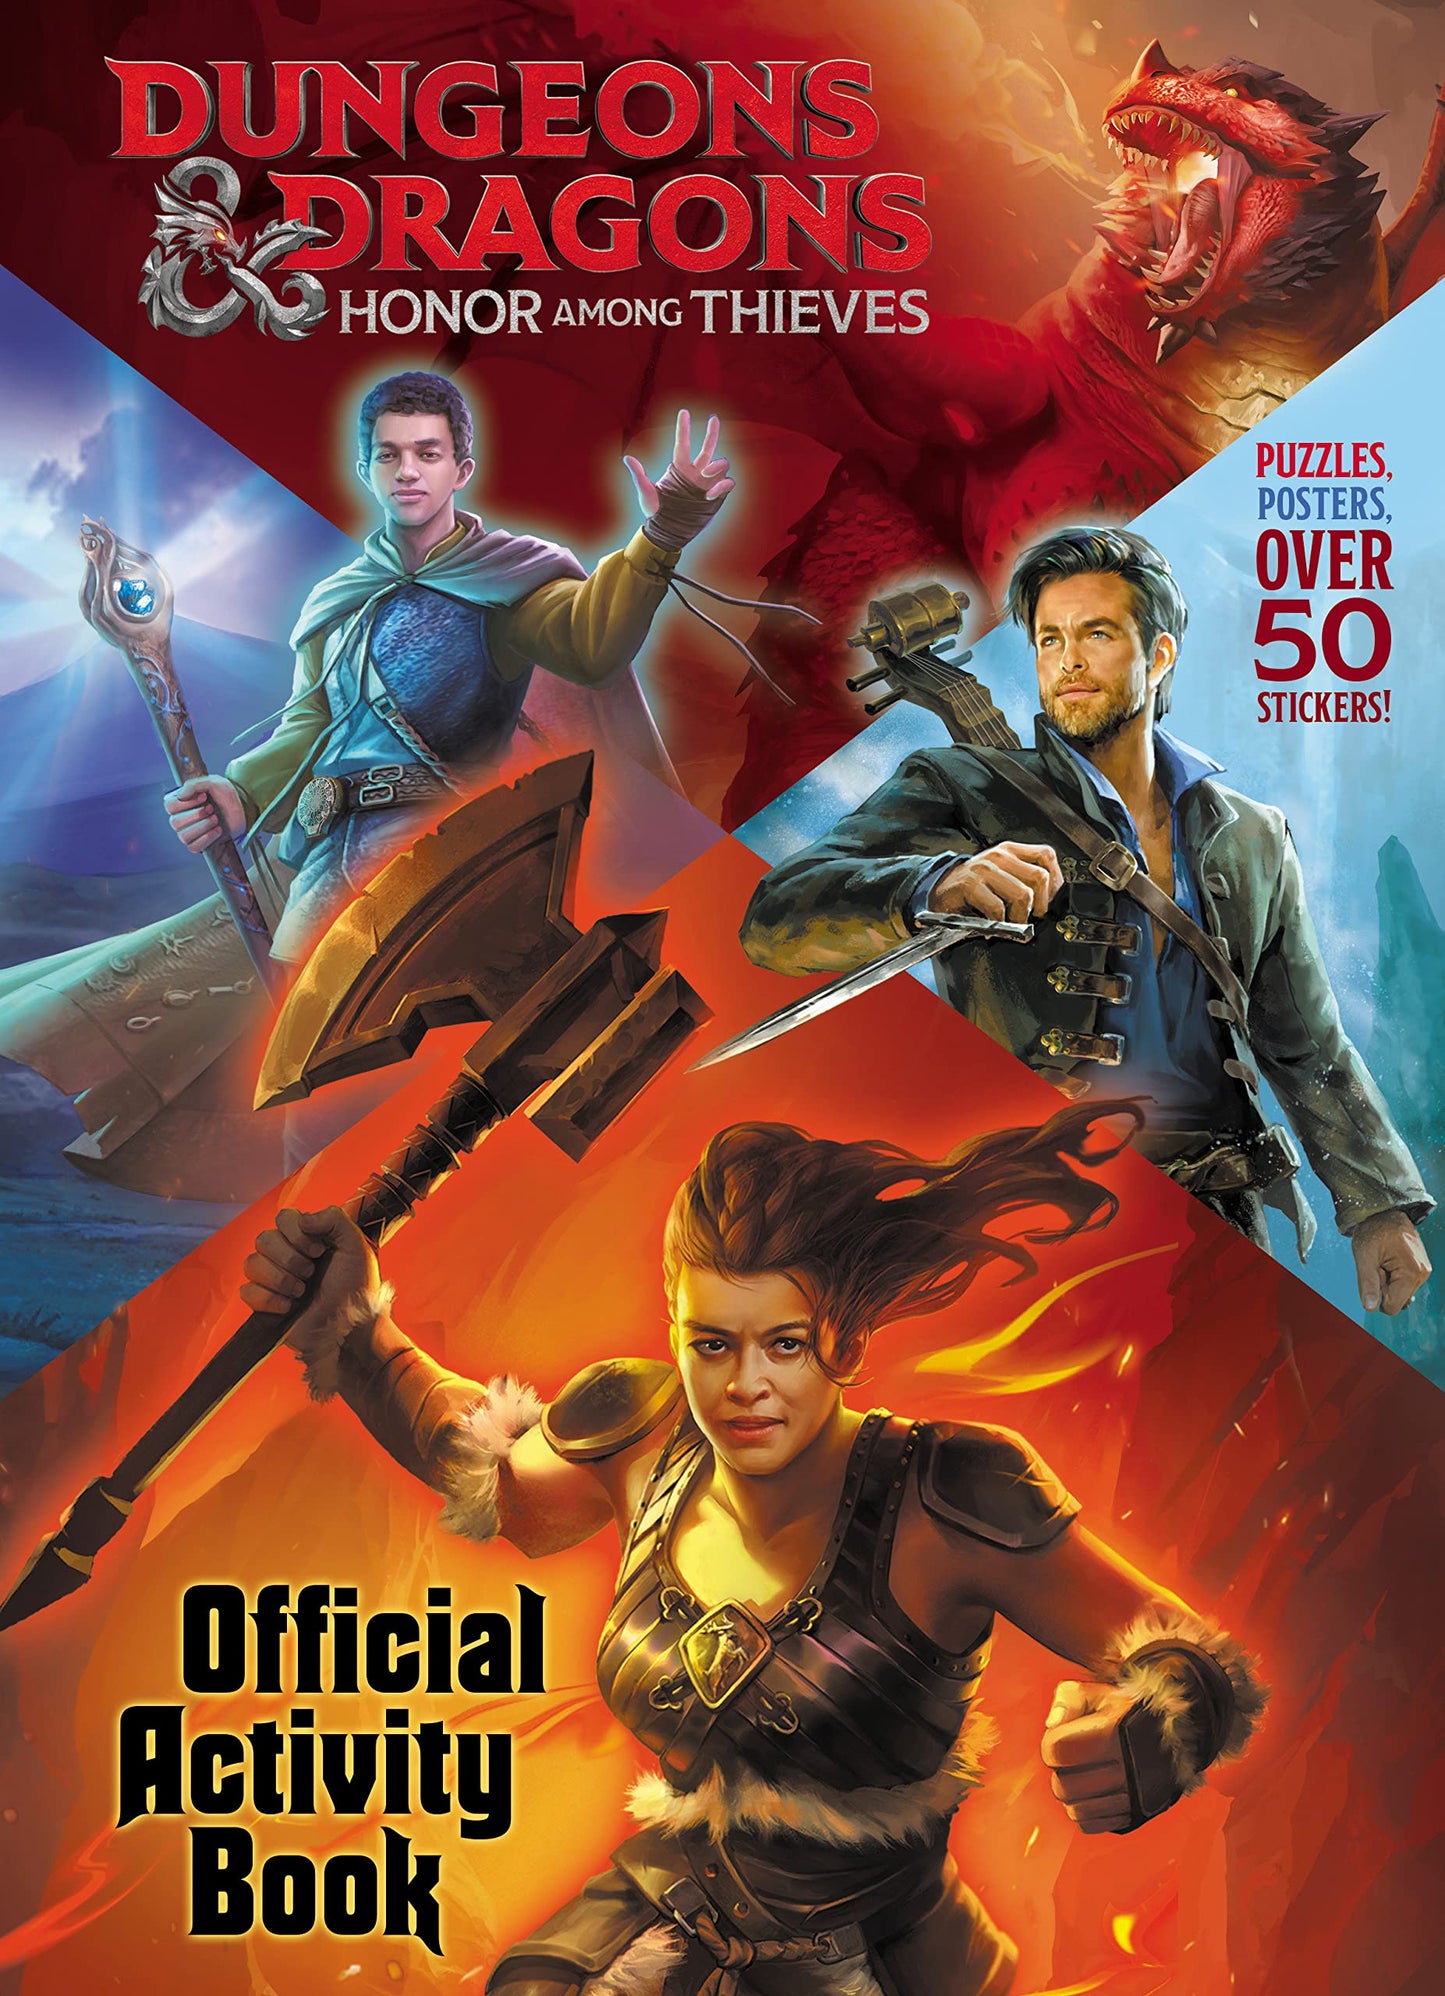 Dungeons & Dragons Honor Among Thieves Official Activity Book